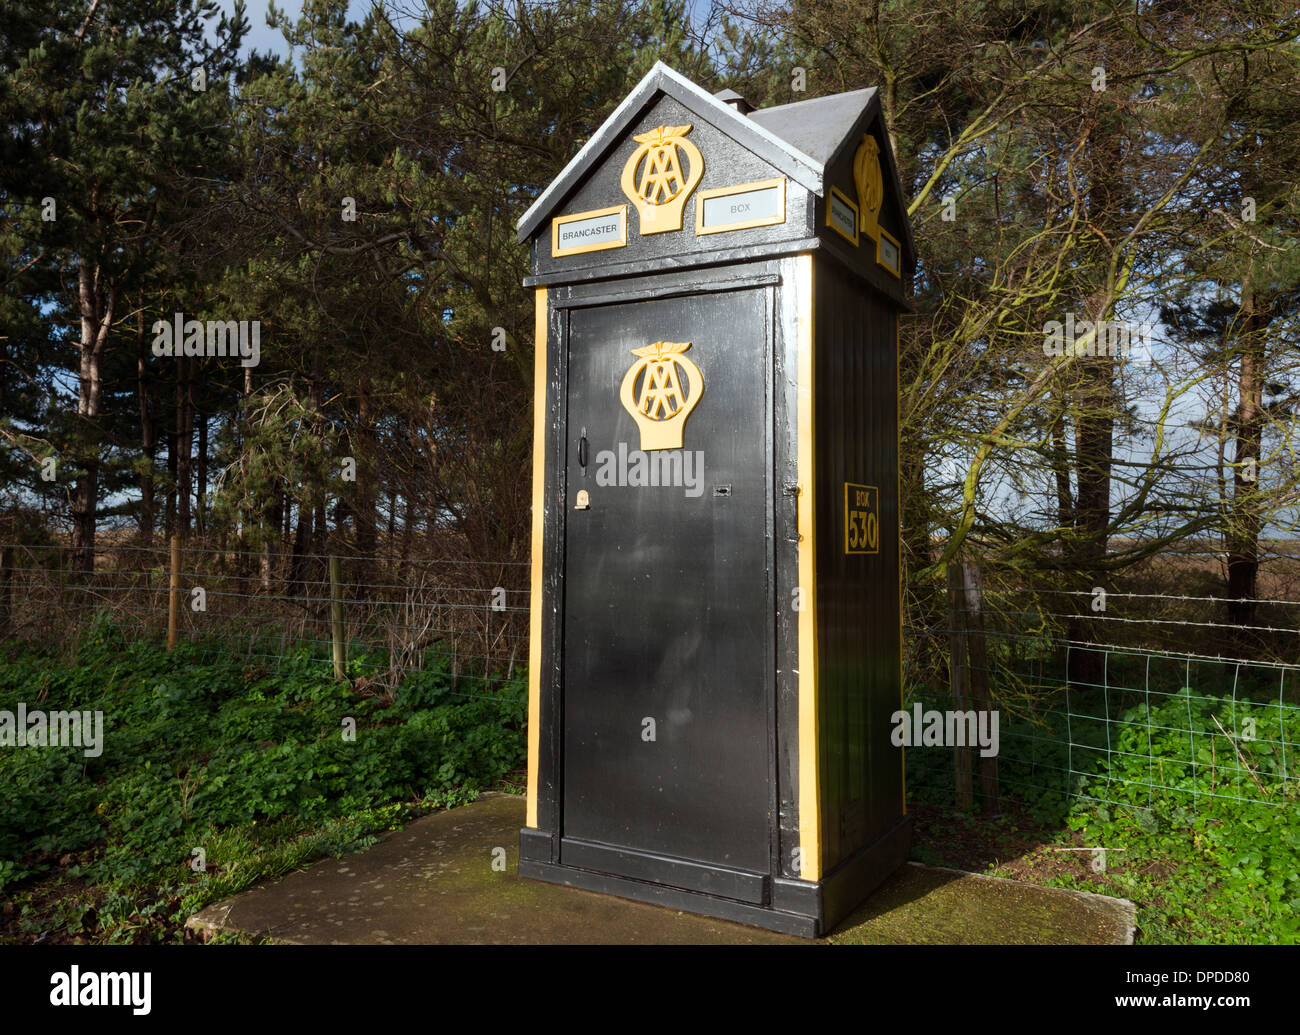 AA sentry box no. 530 is a listed building at Brancaster, North Norfolk, UK. Stock Photo